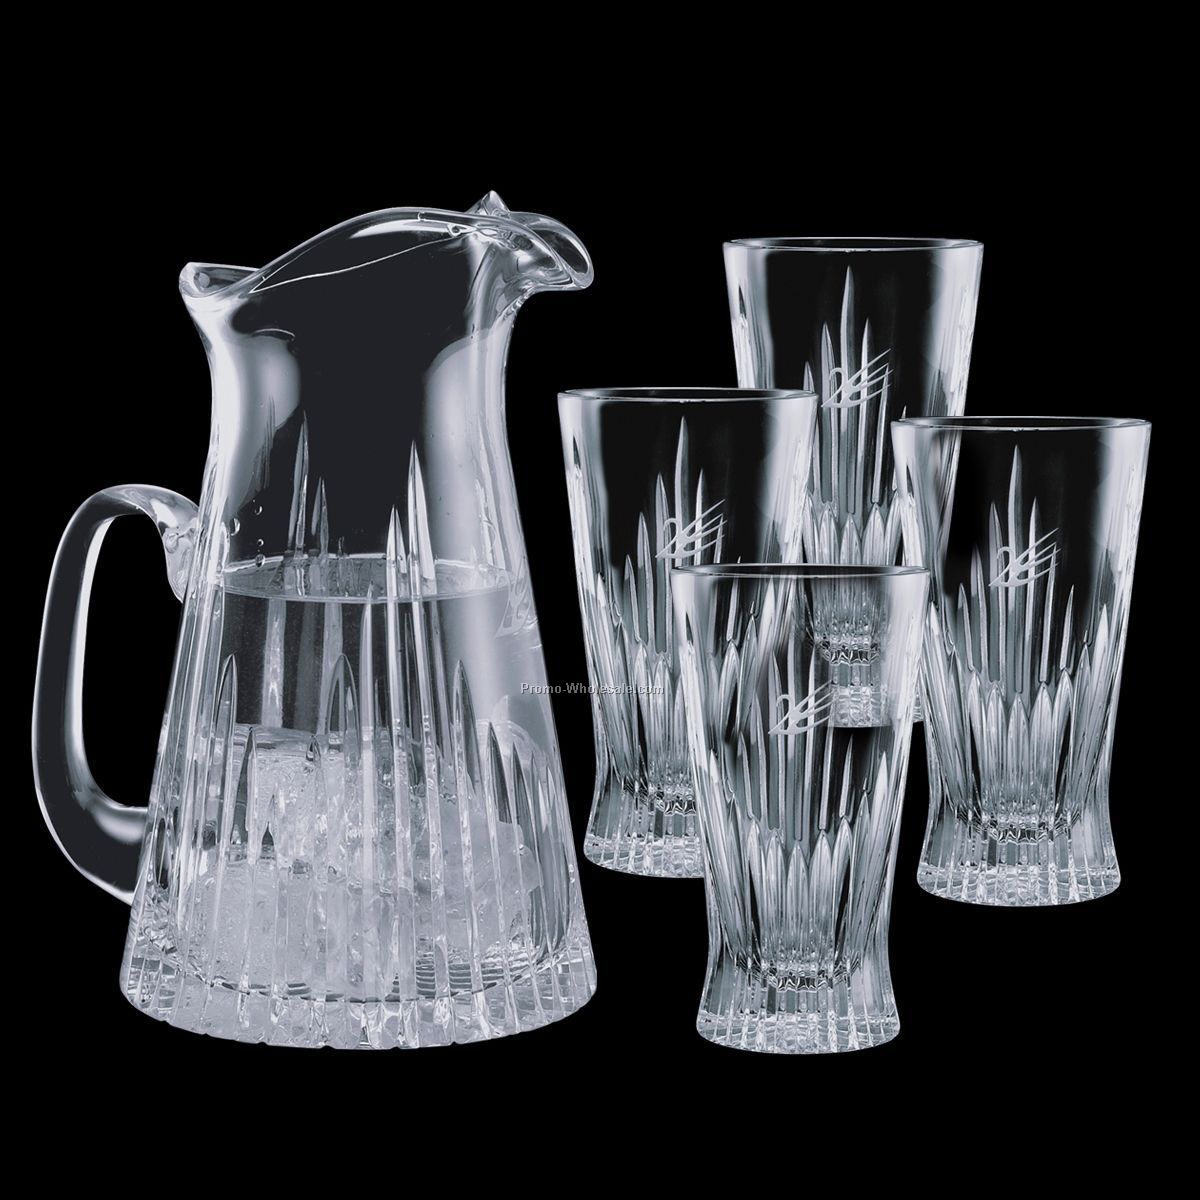 30 Oz. Cromwell Pitcher & 4 14 Oz. Coolers